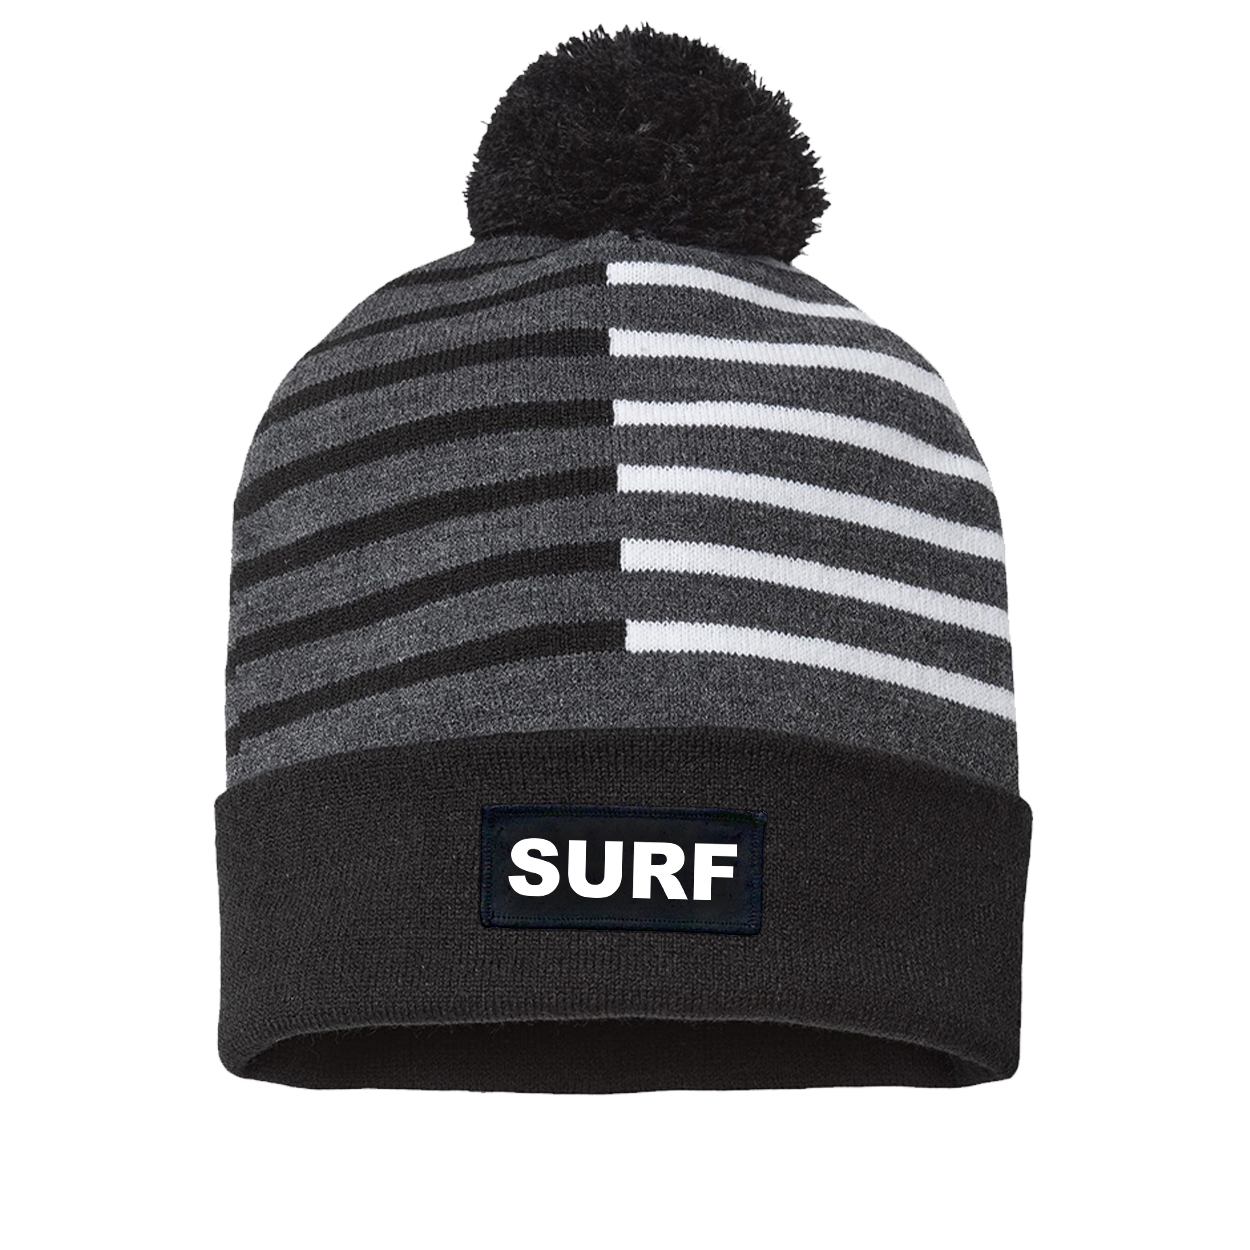 Surf Brand Logo Night Out Woven Patch Roll Up Pom Knit Beanie Half Color Black/White (White Logo)